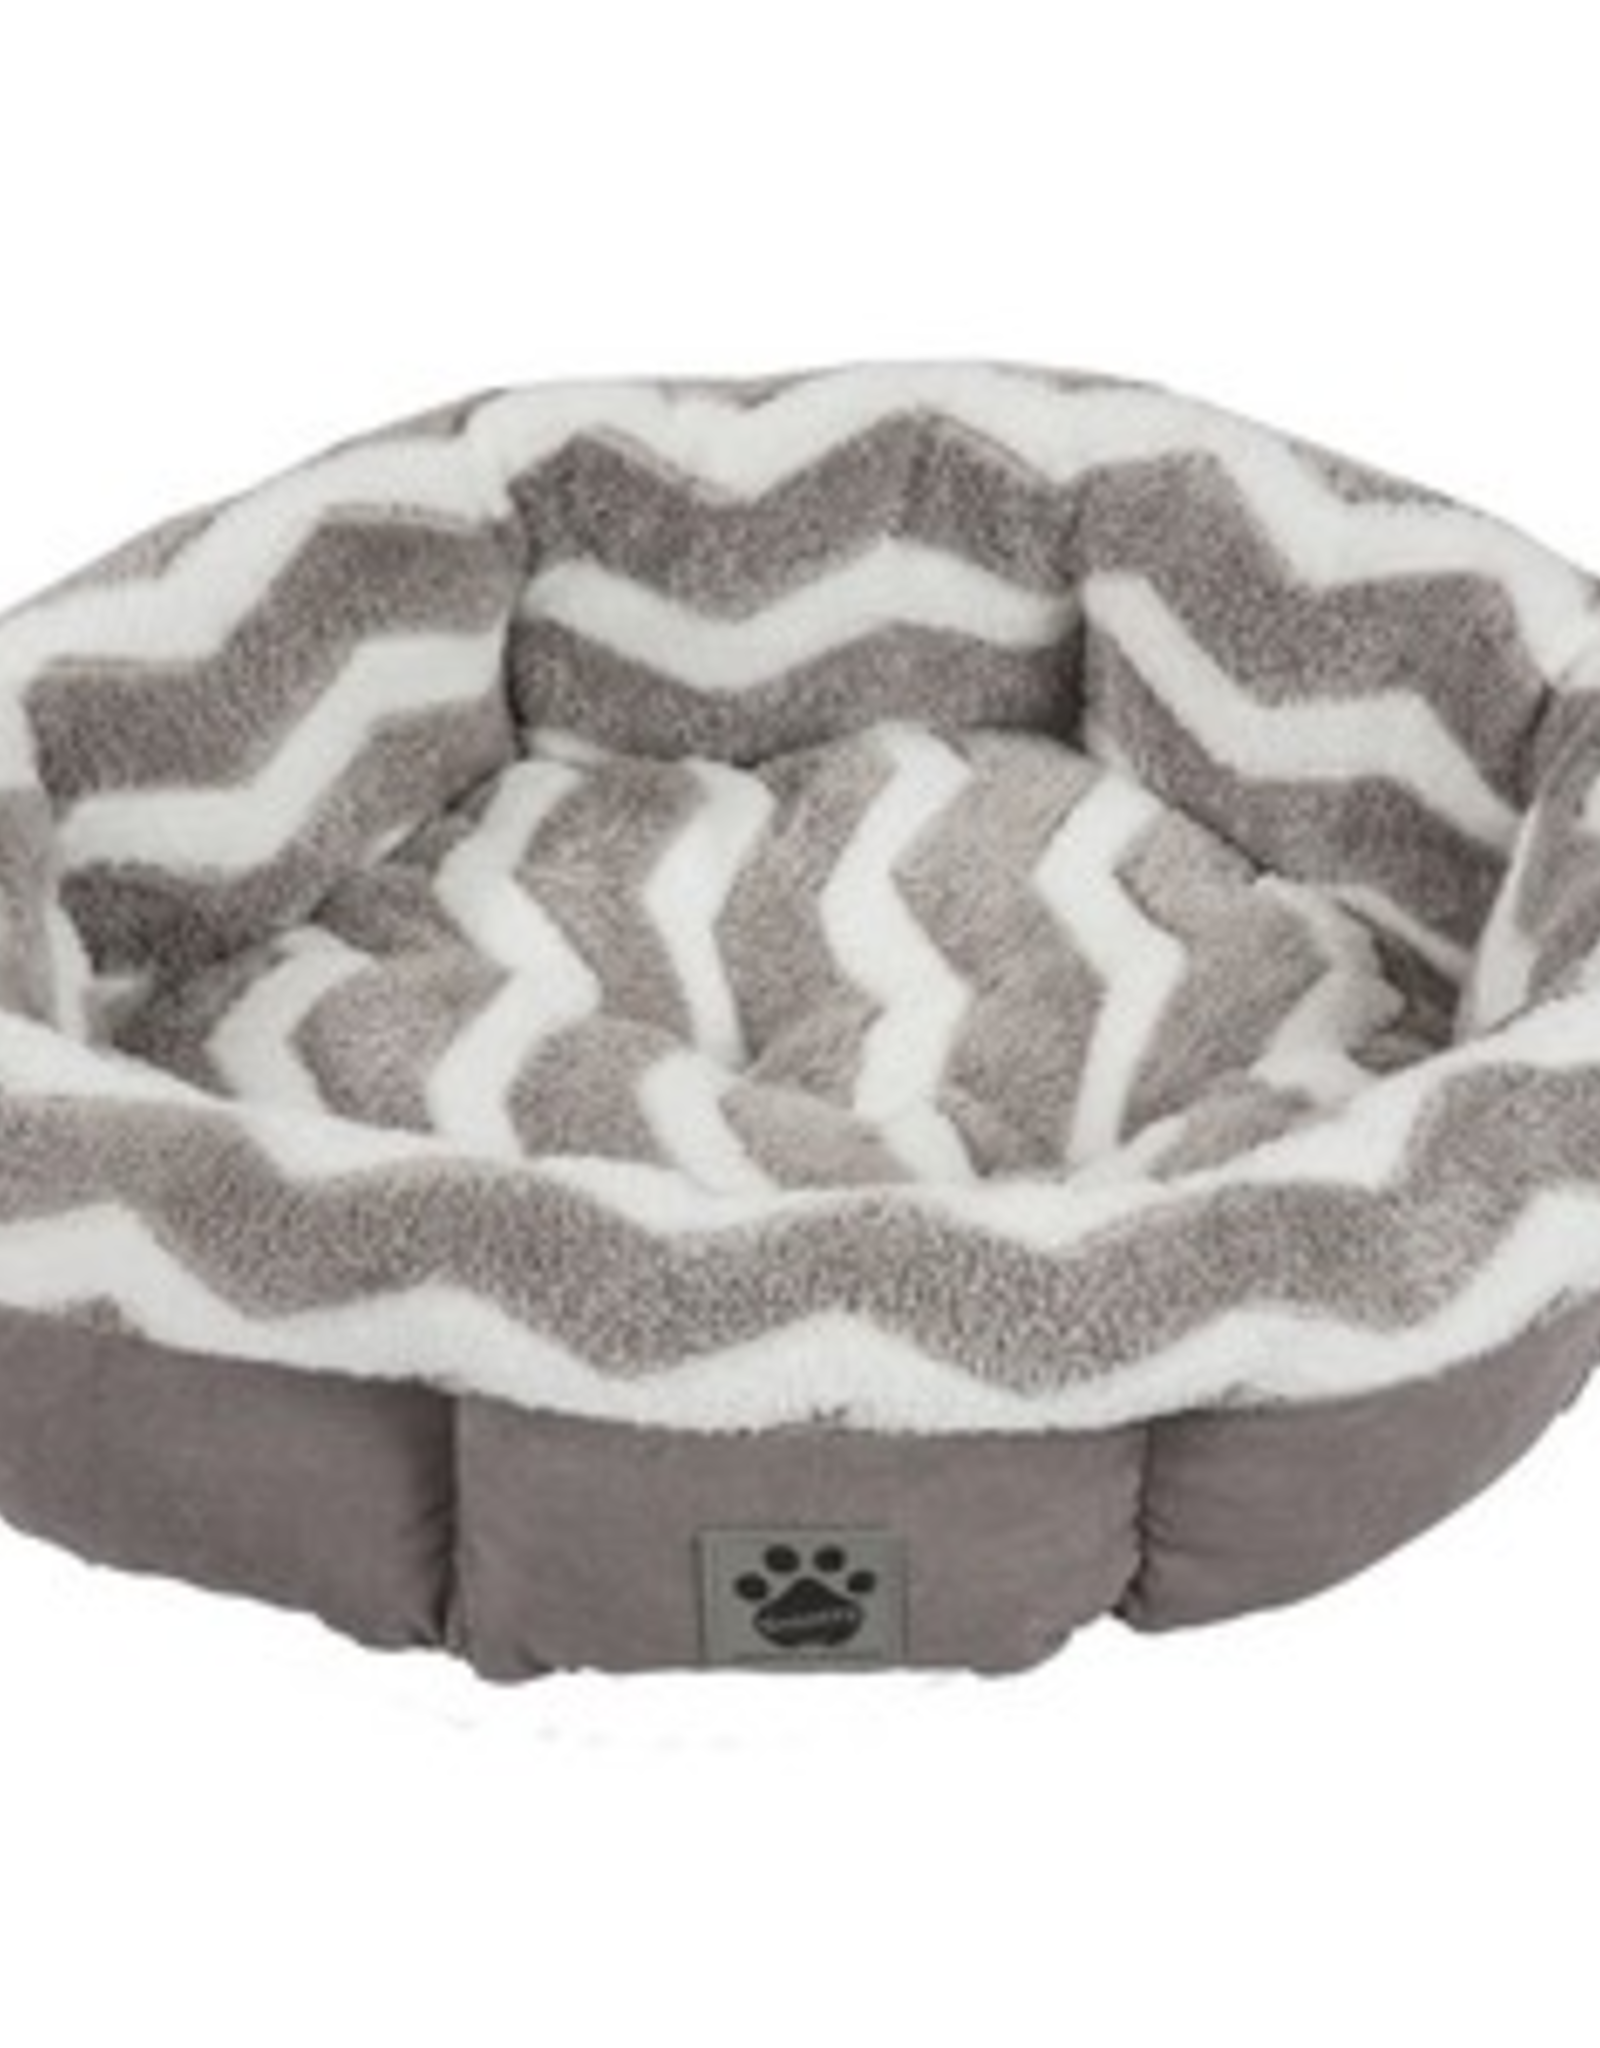 PRECISION PET PRODUCTS PRECISION PET ROUND SHEARLING CUDDLER GREY & PINK 21"